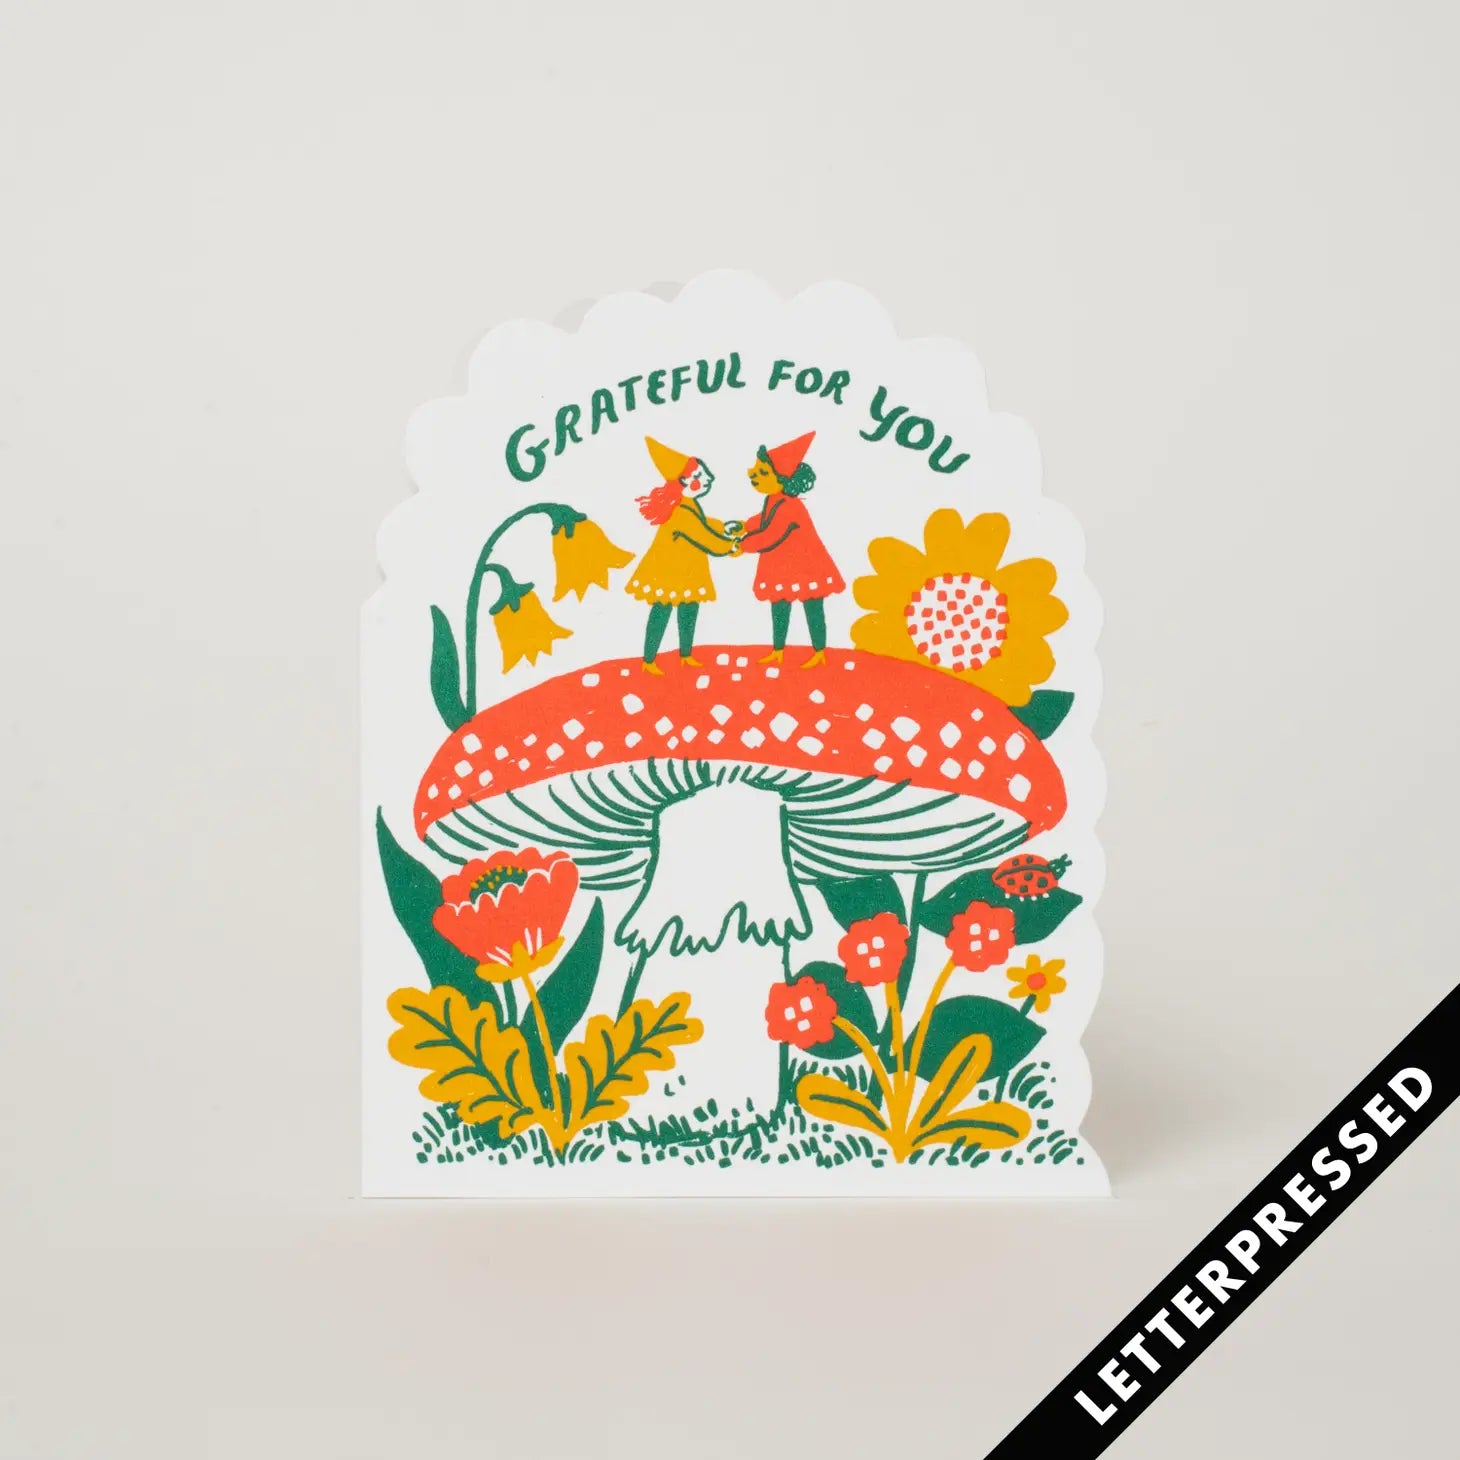 Egg Press Greeting Card - Grateful For You